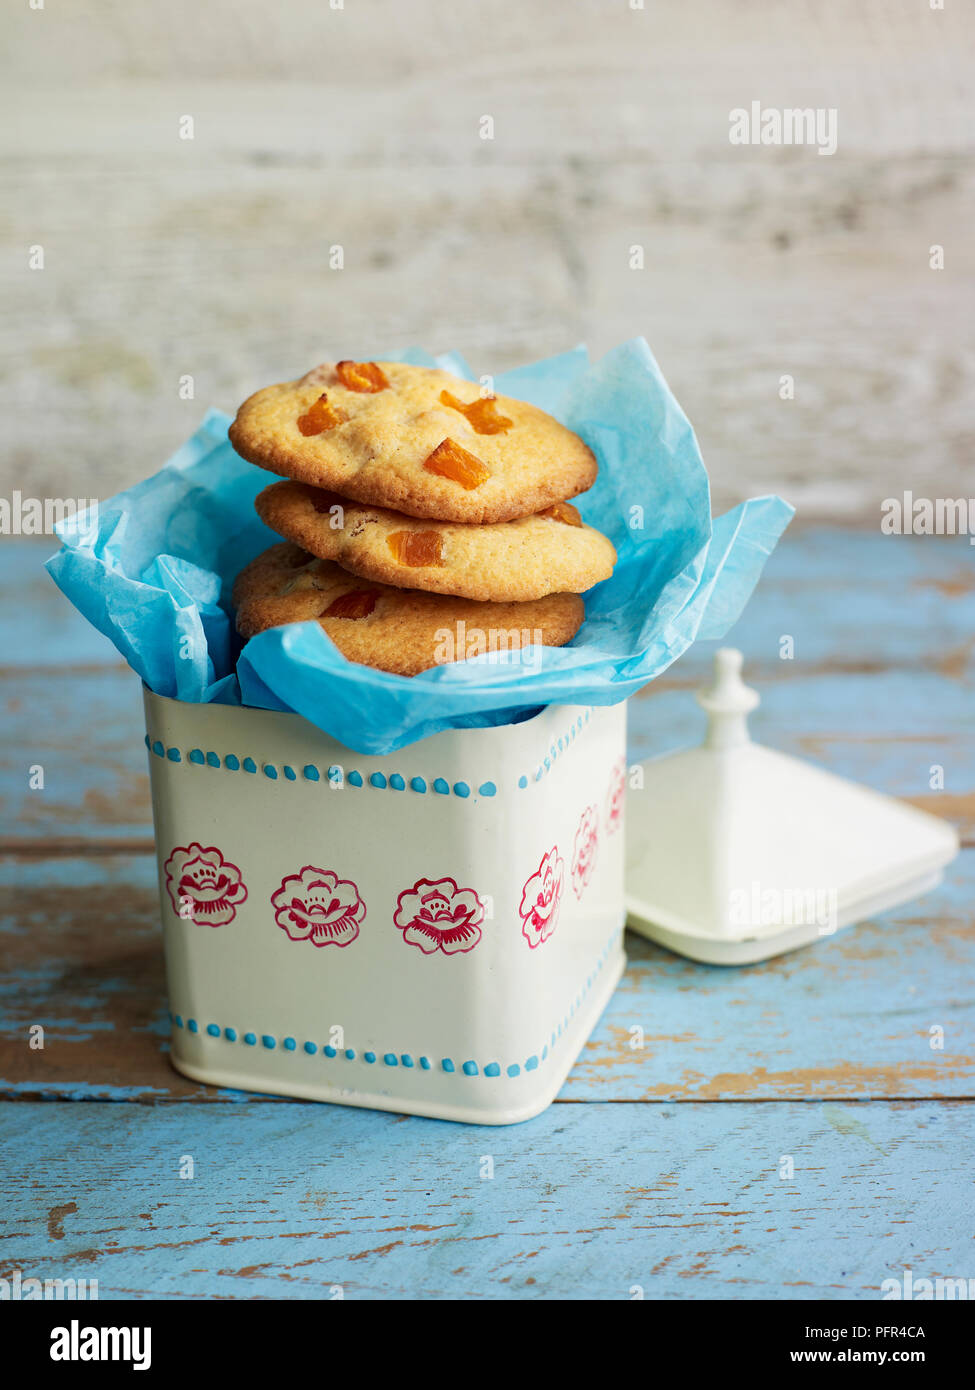 Apricot and cinnamon cookies or biscuits Stock Photo